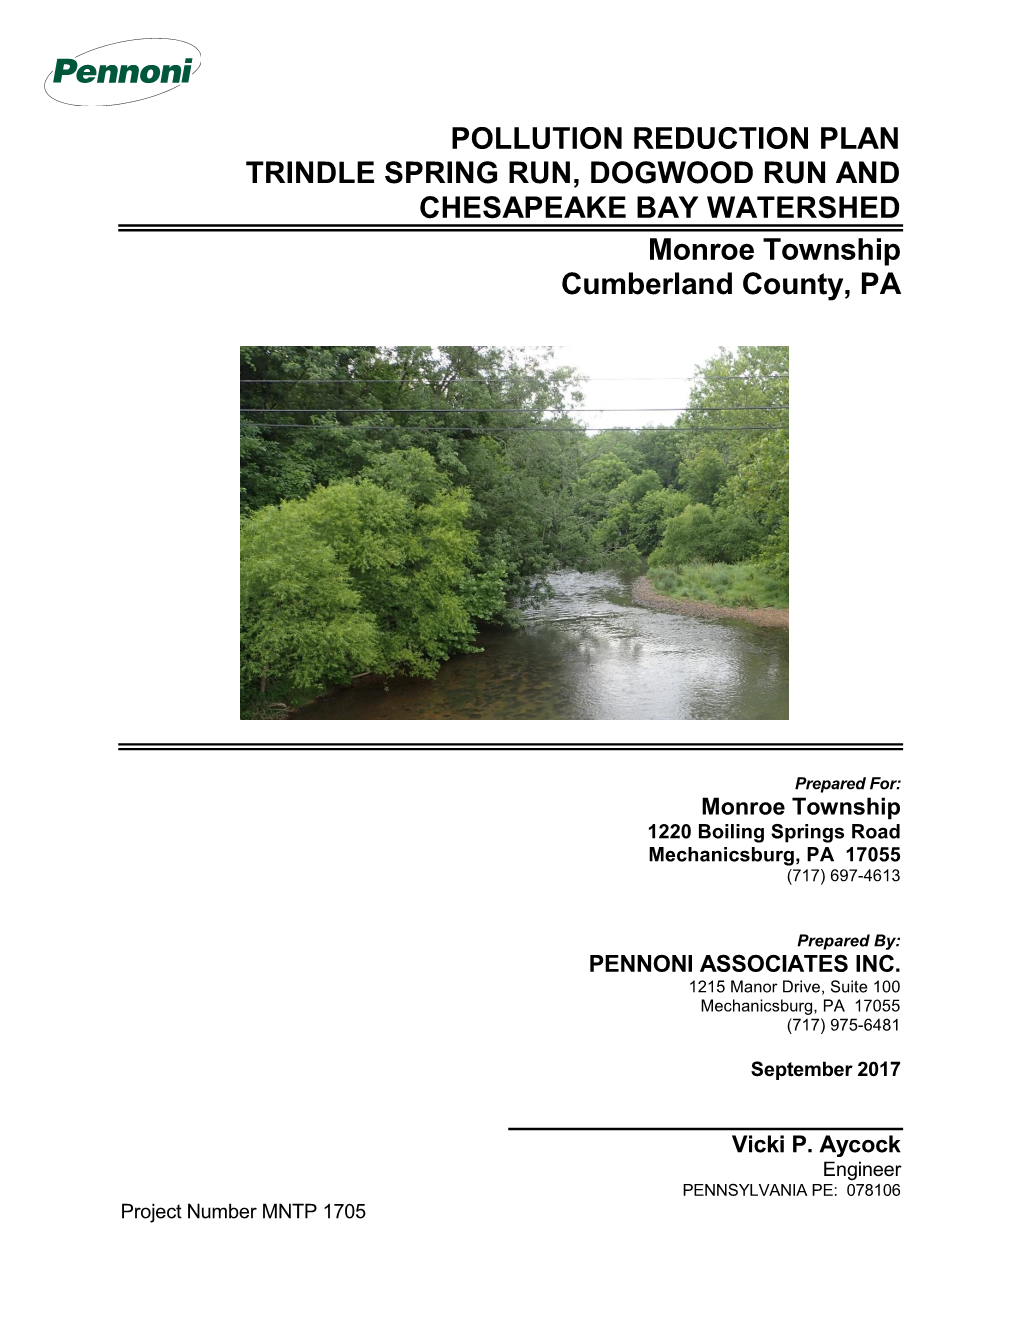 POLLUTION REDUCTION PLAN TRINDLE SPRING RUN, DOGWOOD RUN and CHESAPEAKE BAY WATERSHED Monroe Township Cumberland County, PA